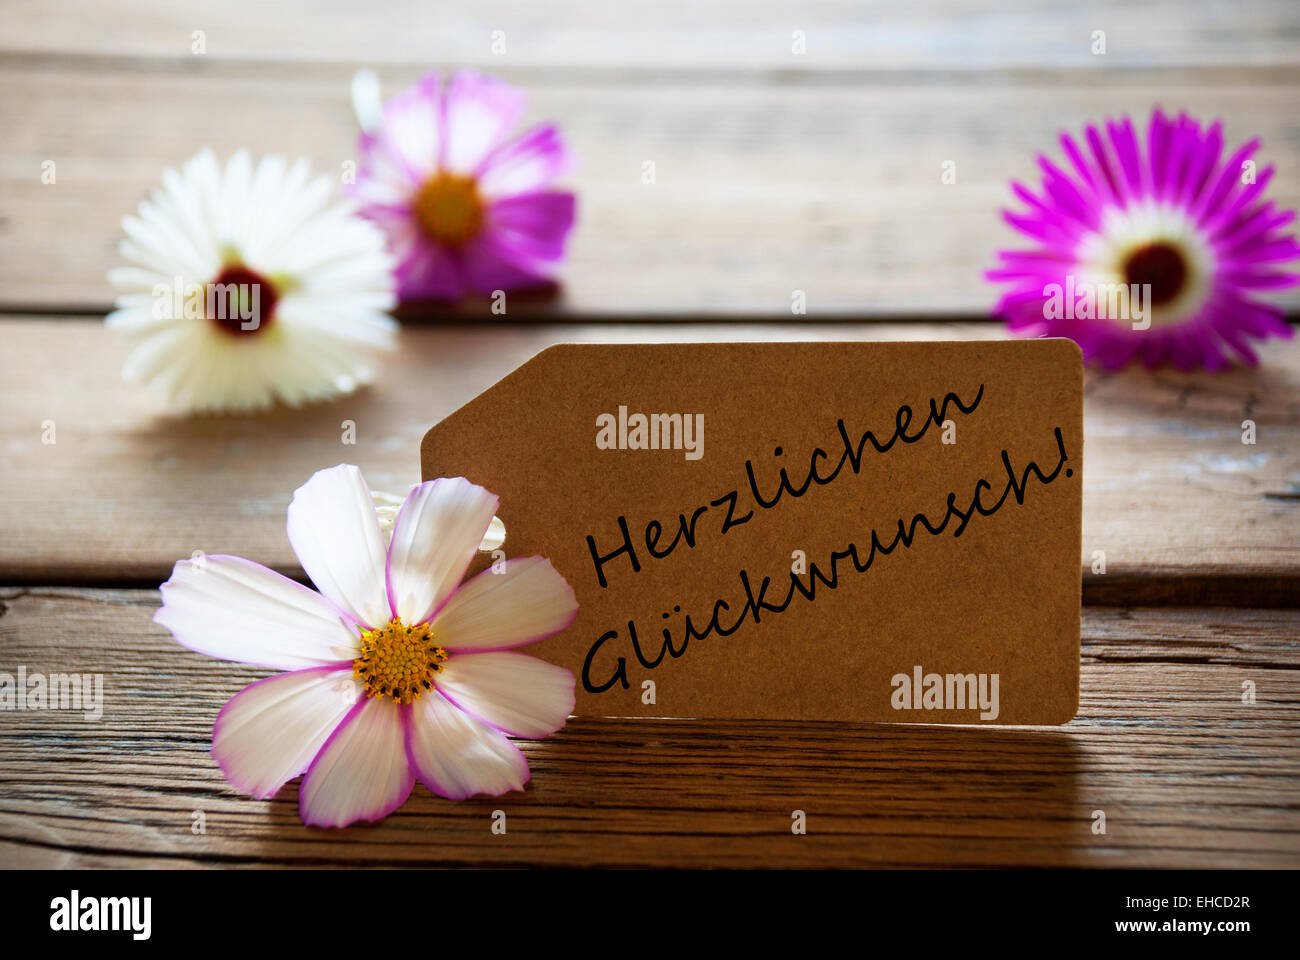 Brown Label With German Text Herzlichen Glueckwunsch Means Best Wishes With Purple And White Cosmea Blossoms On Wooden Backgroun Stock Photo